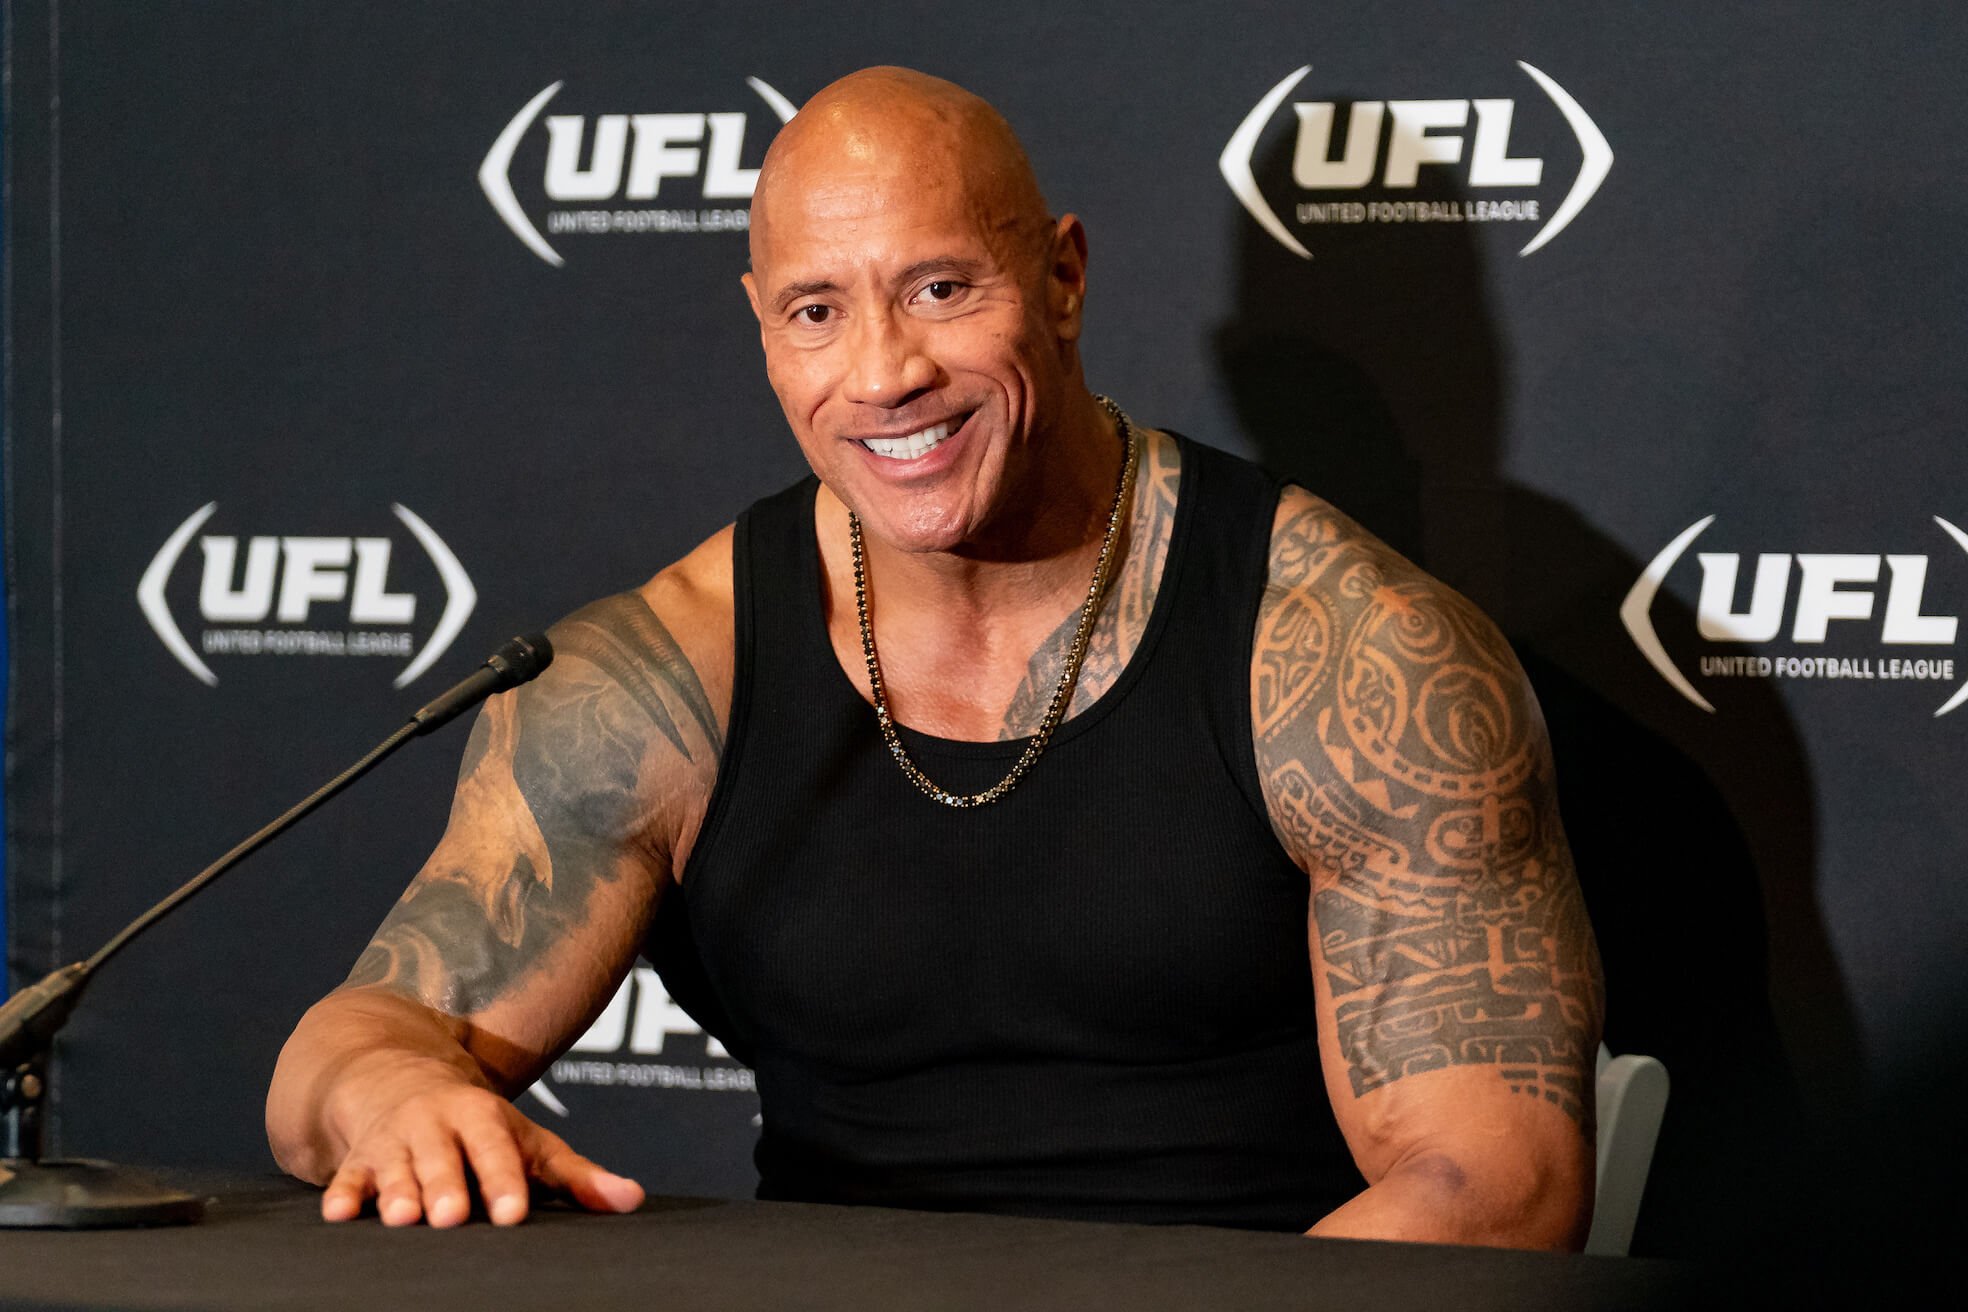 Dwayne 'The Rock' Johnson at a press conference. He's sitting at a table and wearing a black tank top that shows his tattoos.